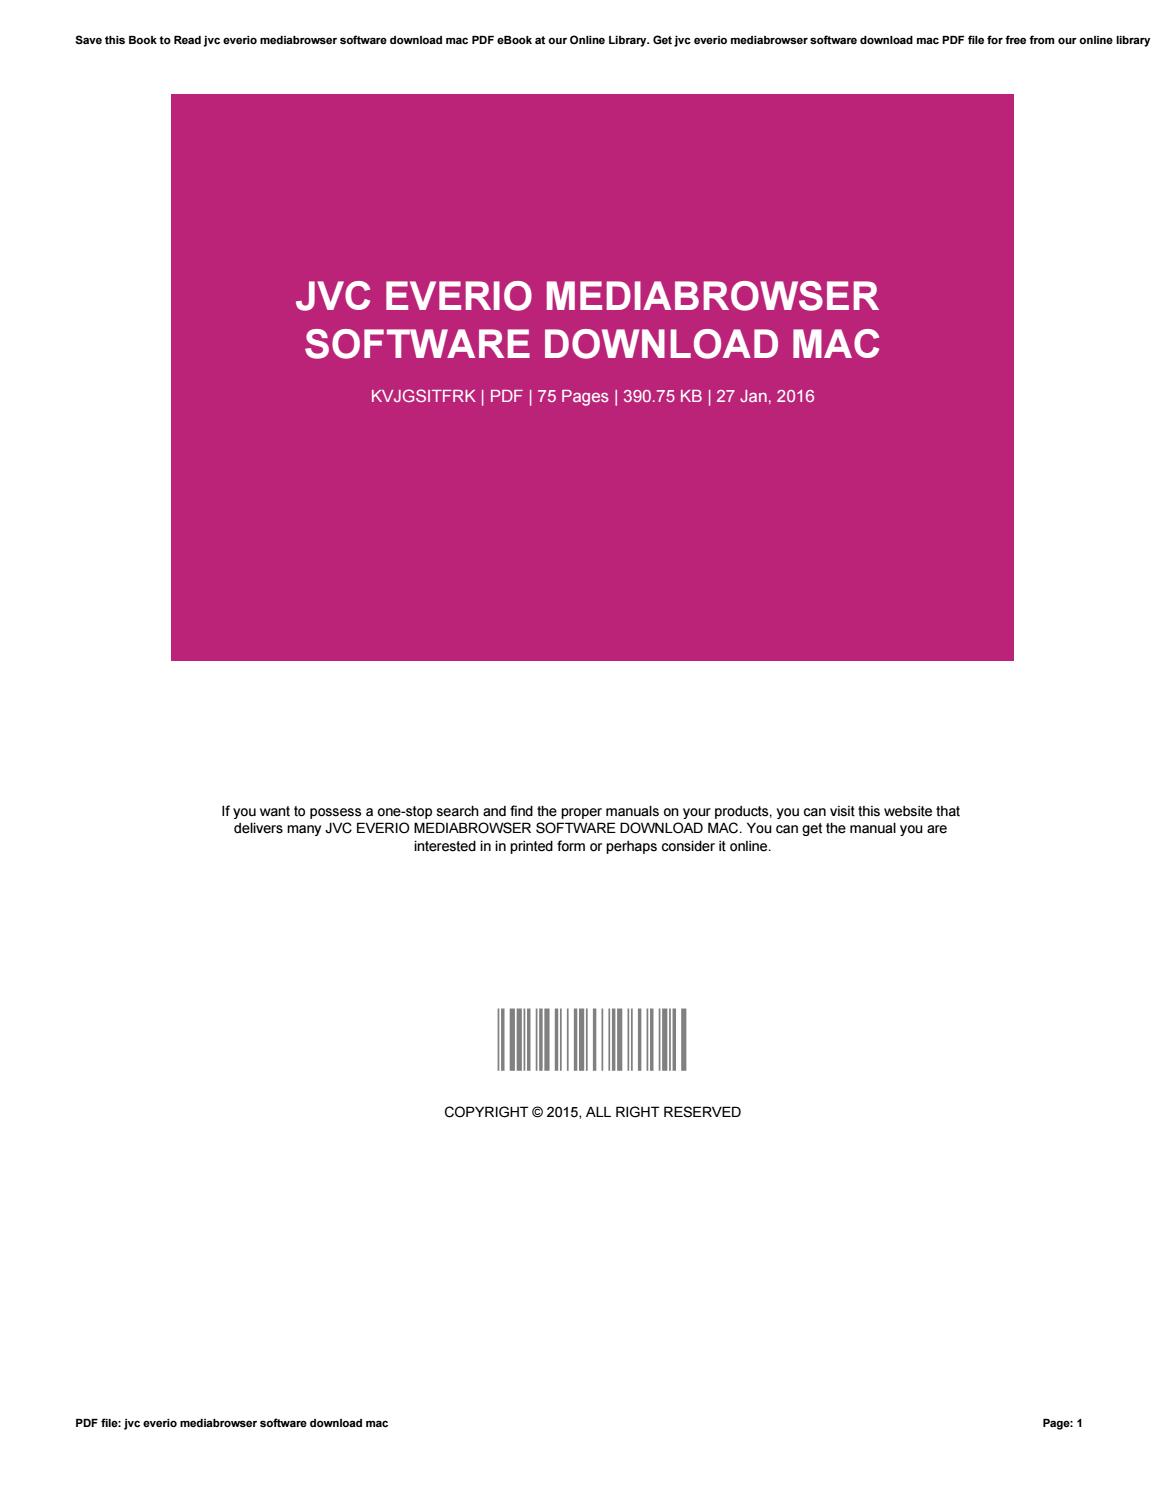 Everio Software For Mac Download